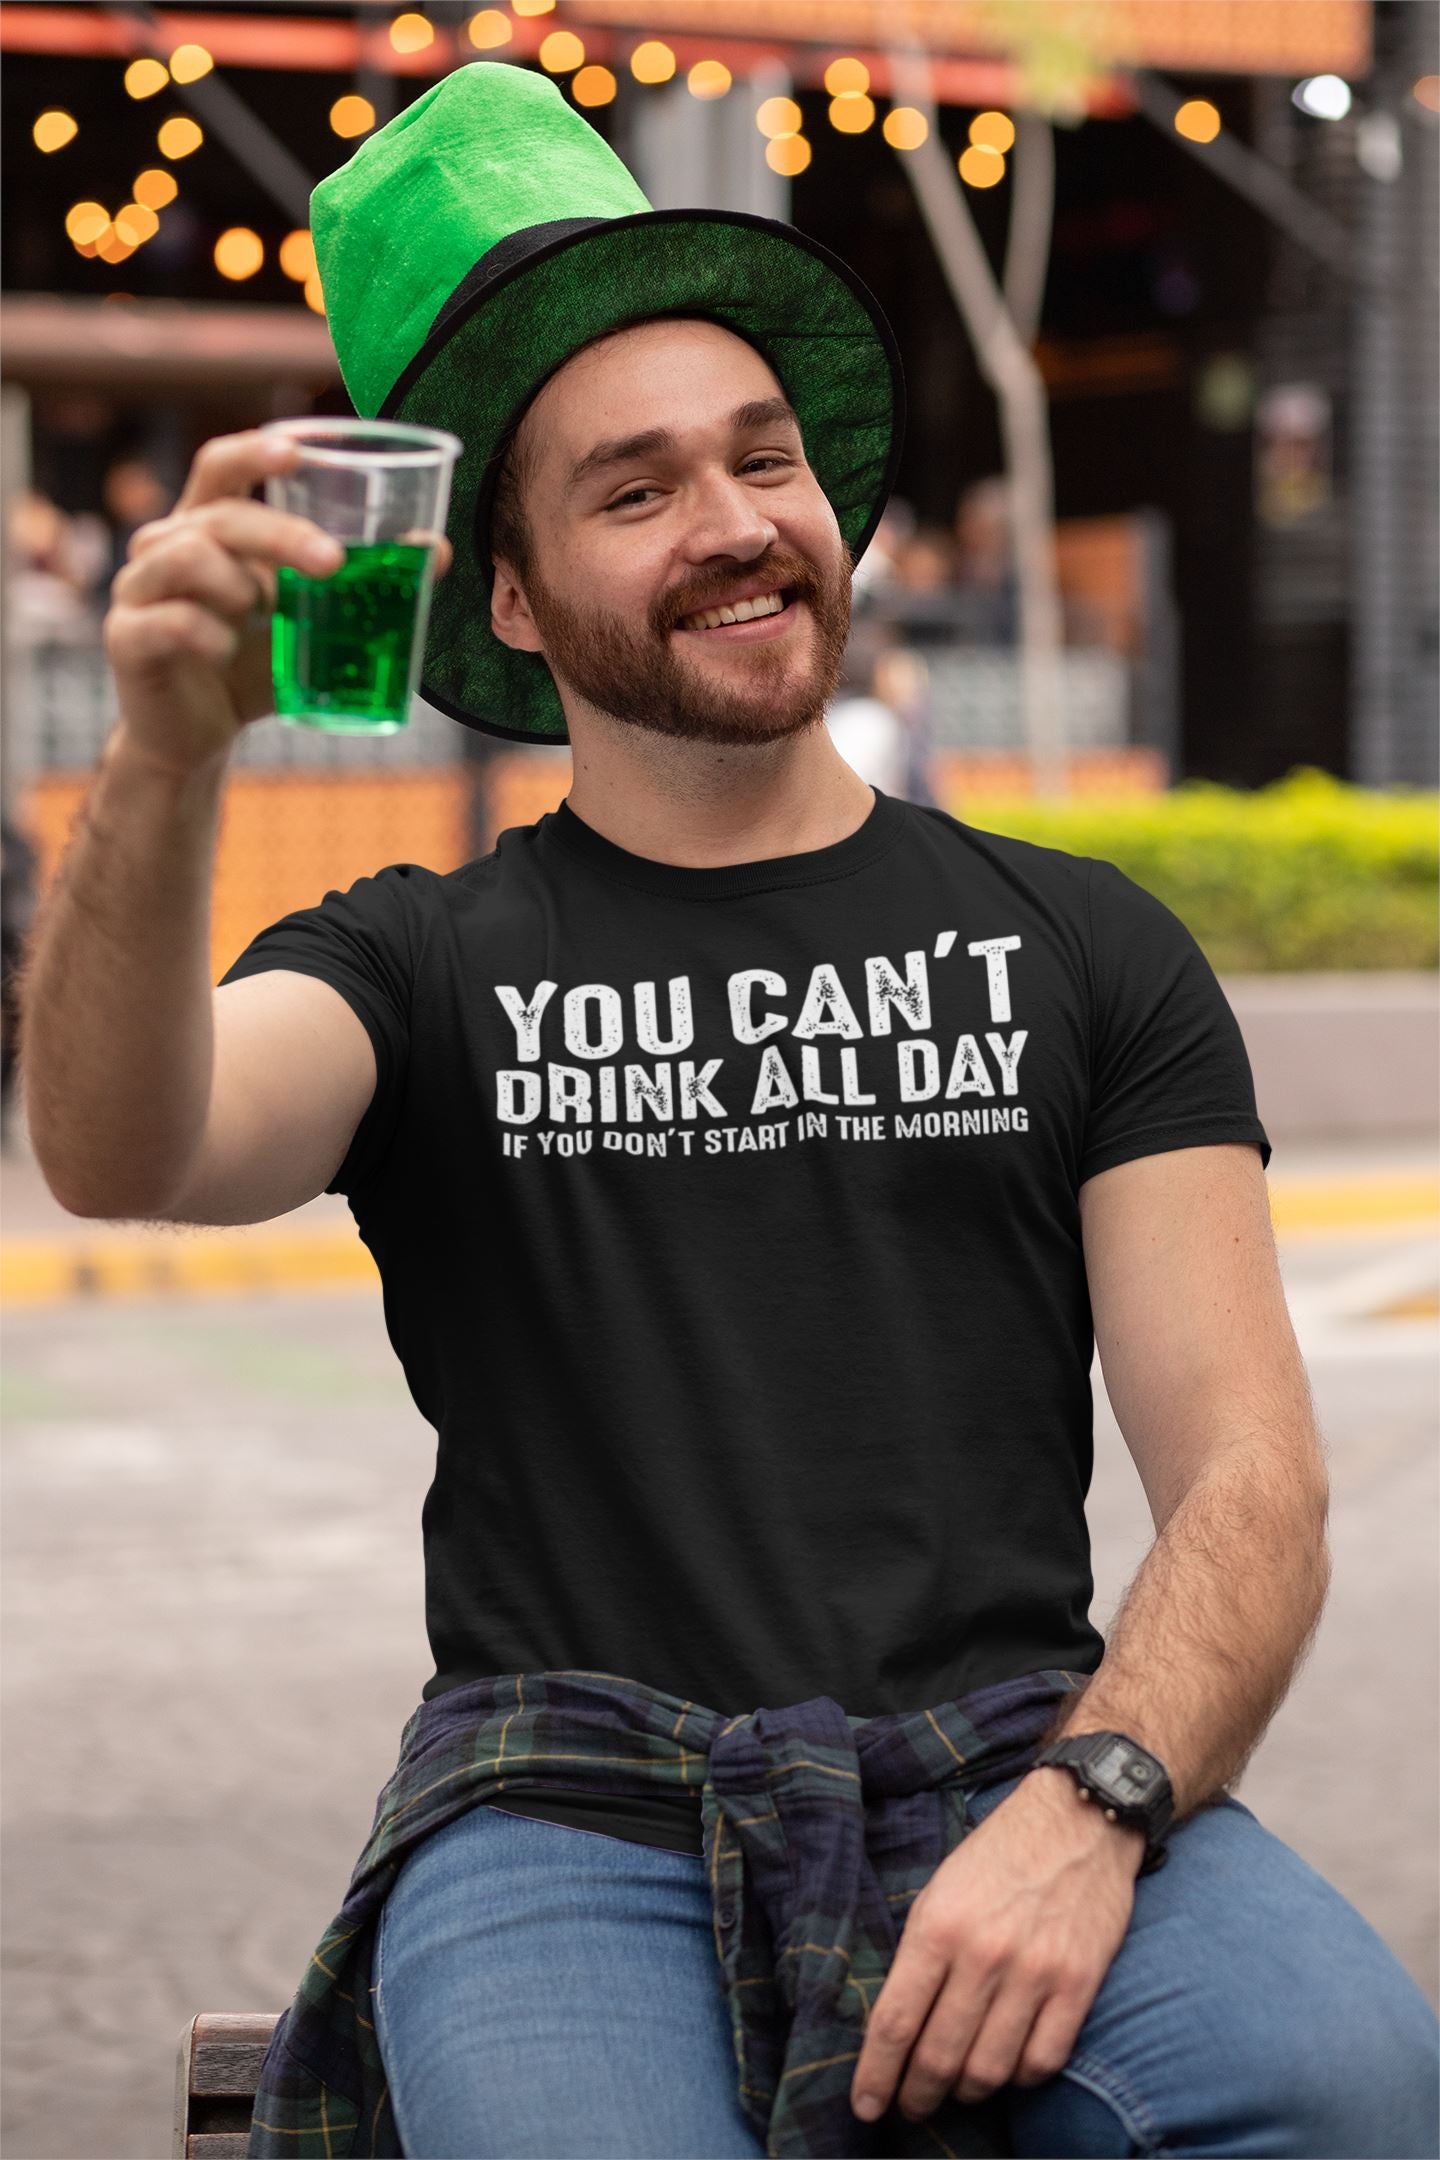 You Can't Drink All Day If You Don't Start in the Morning Funny Black T Shirt for Men and Women freeshipping - Catch My Drift India